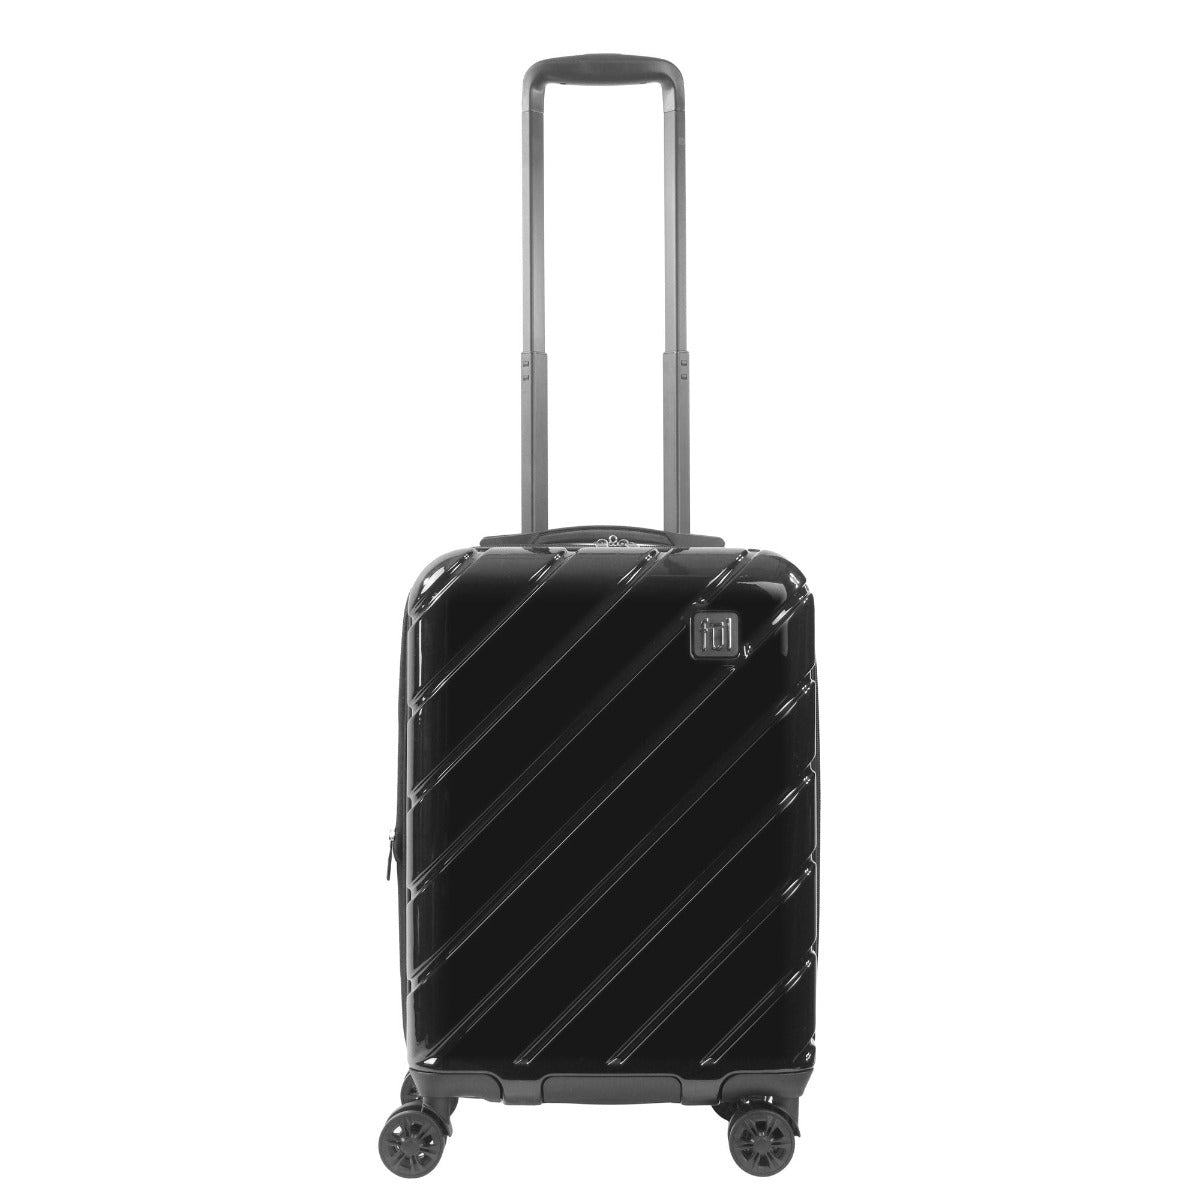 Ful Velocity 23 inch Hardside Spinner Suitcase Black Carry-on Luggage